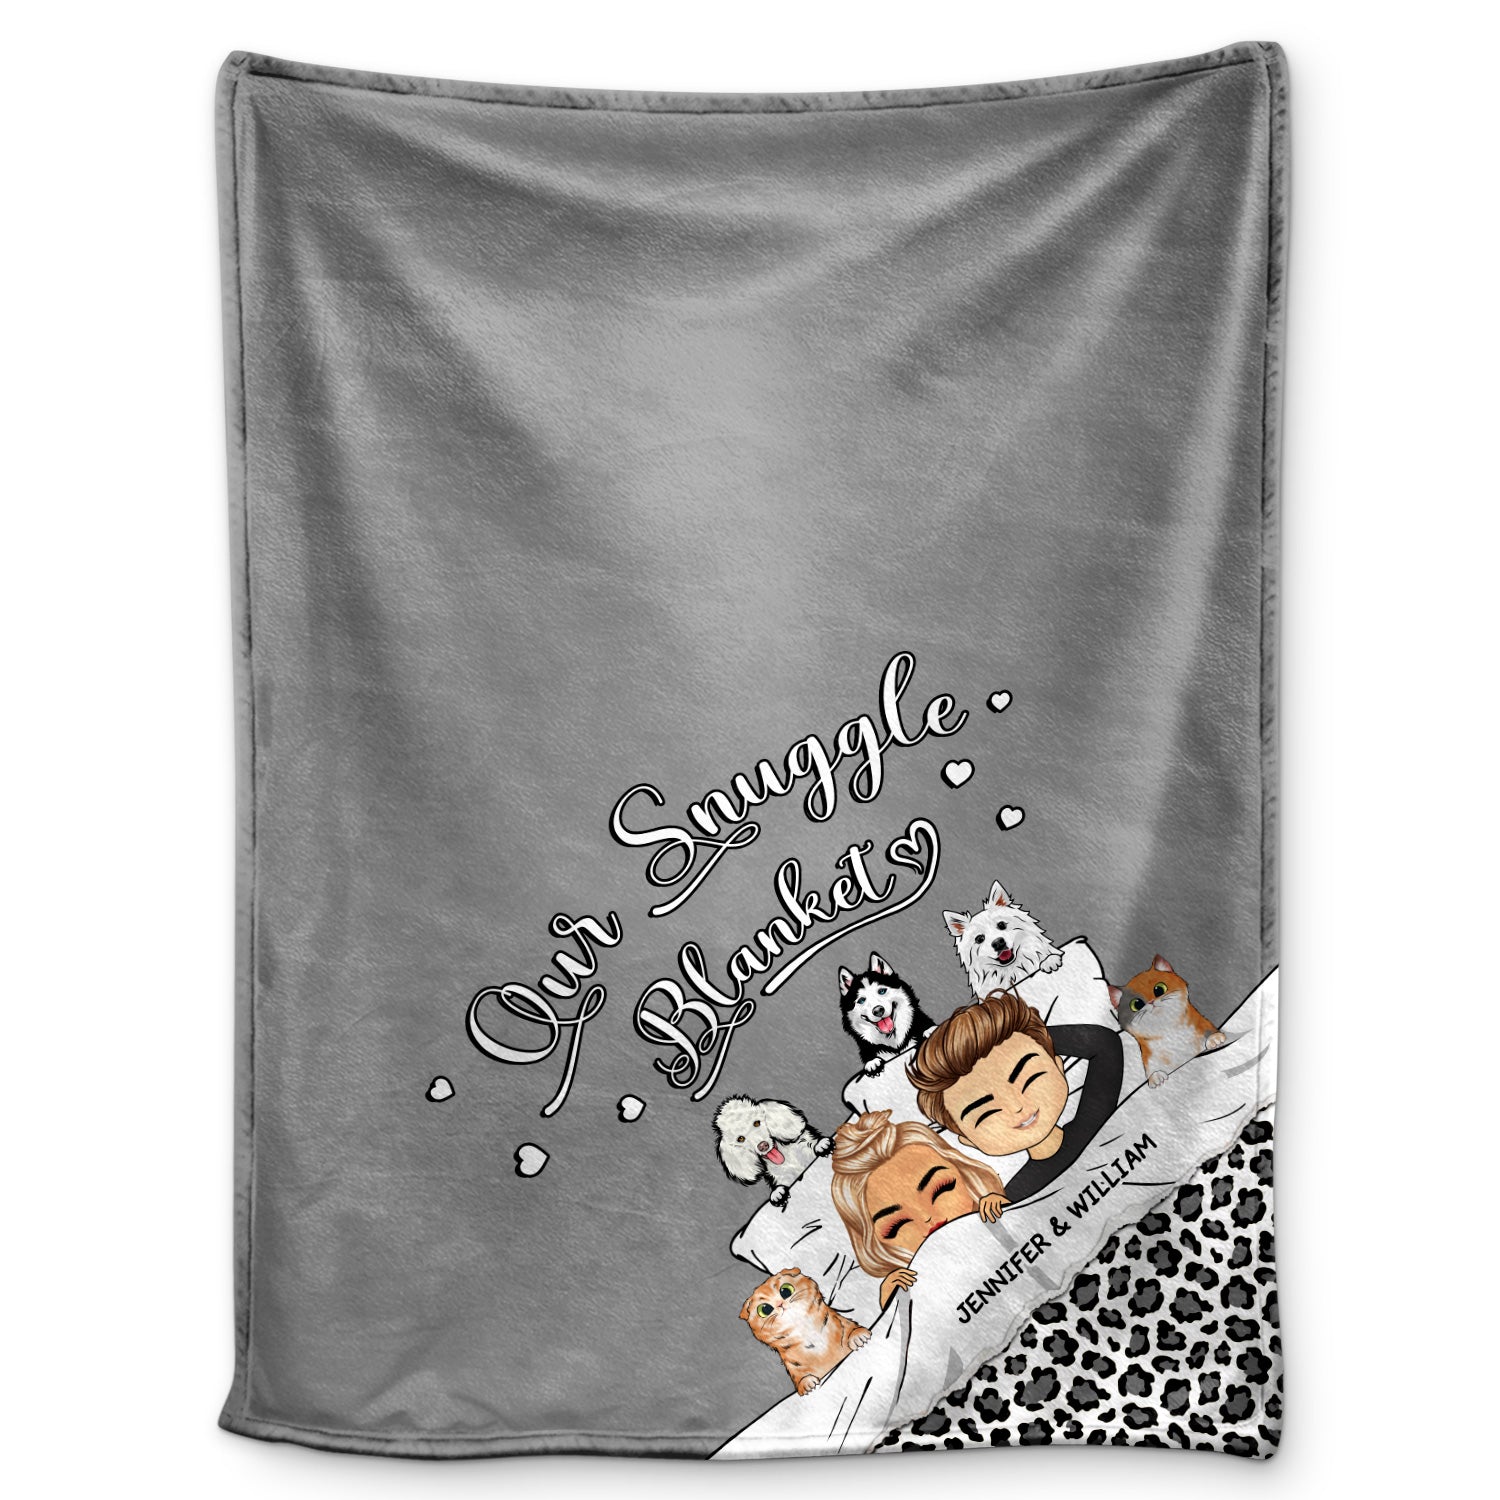 Couple Pet Lovers Our Snuggle Blanket - Gift For Couples - Personalized Custom Fleece Blanket